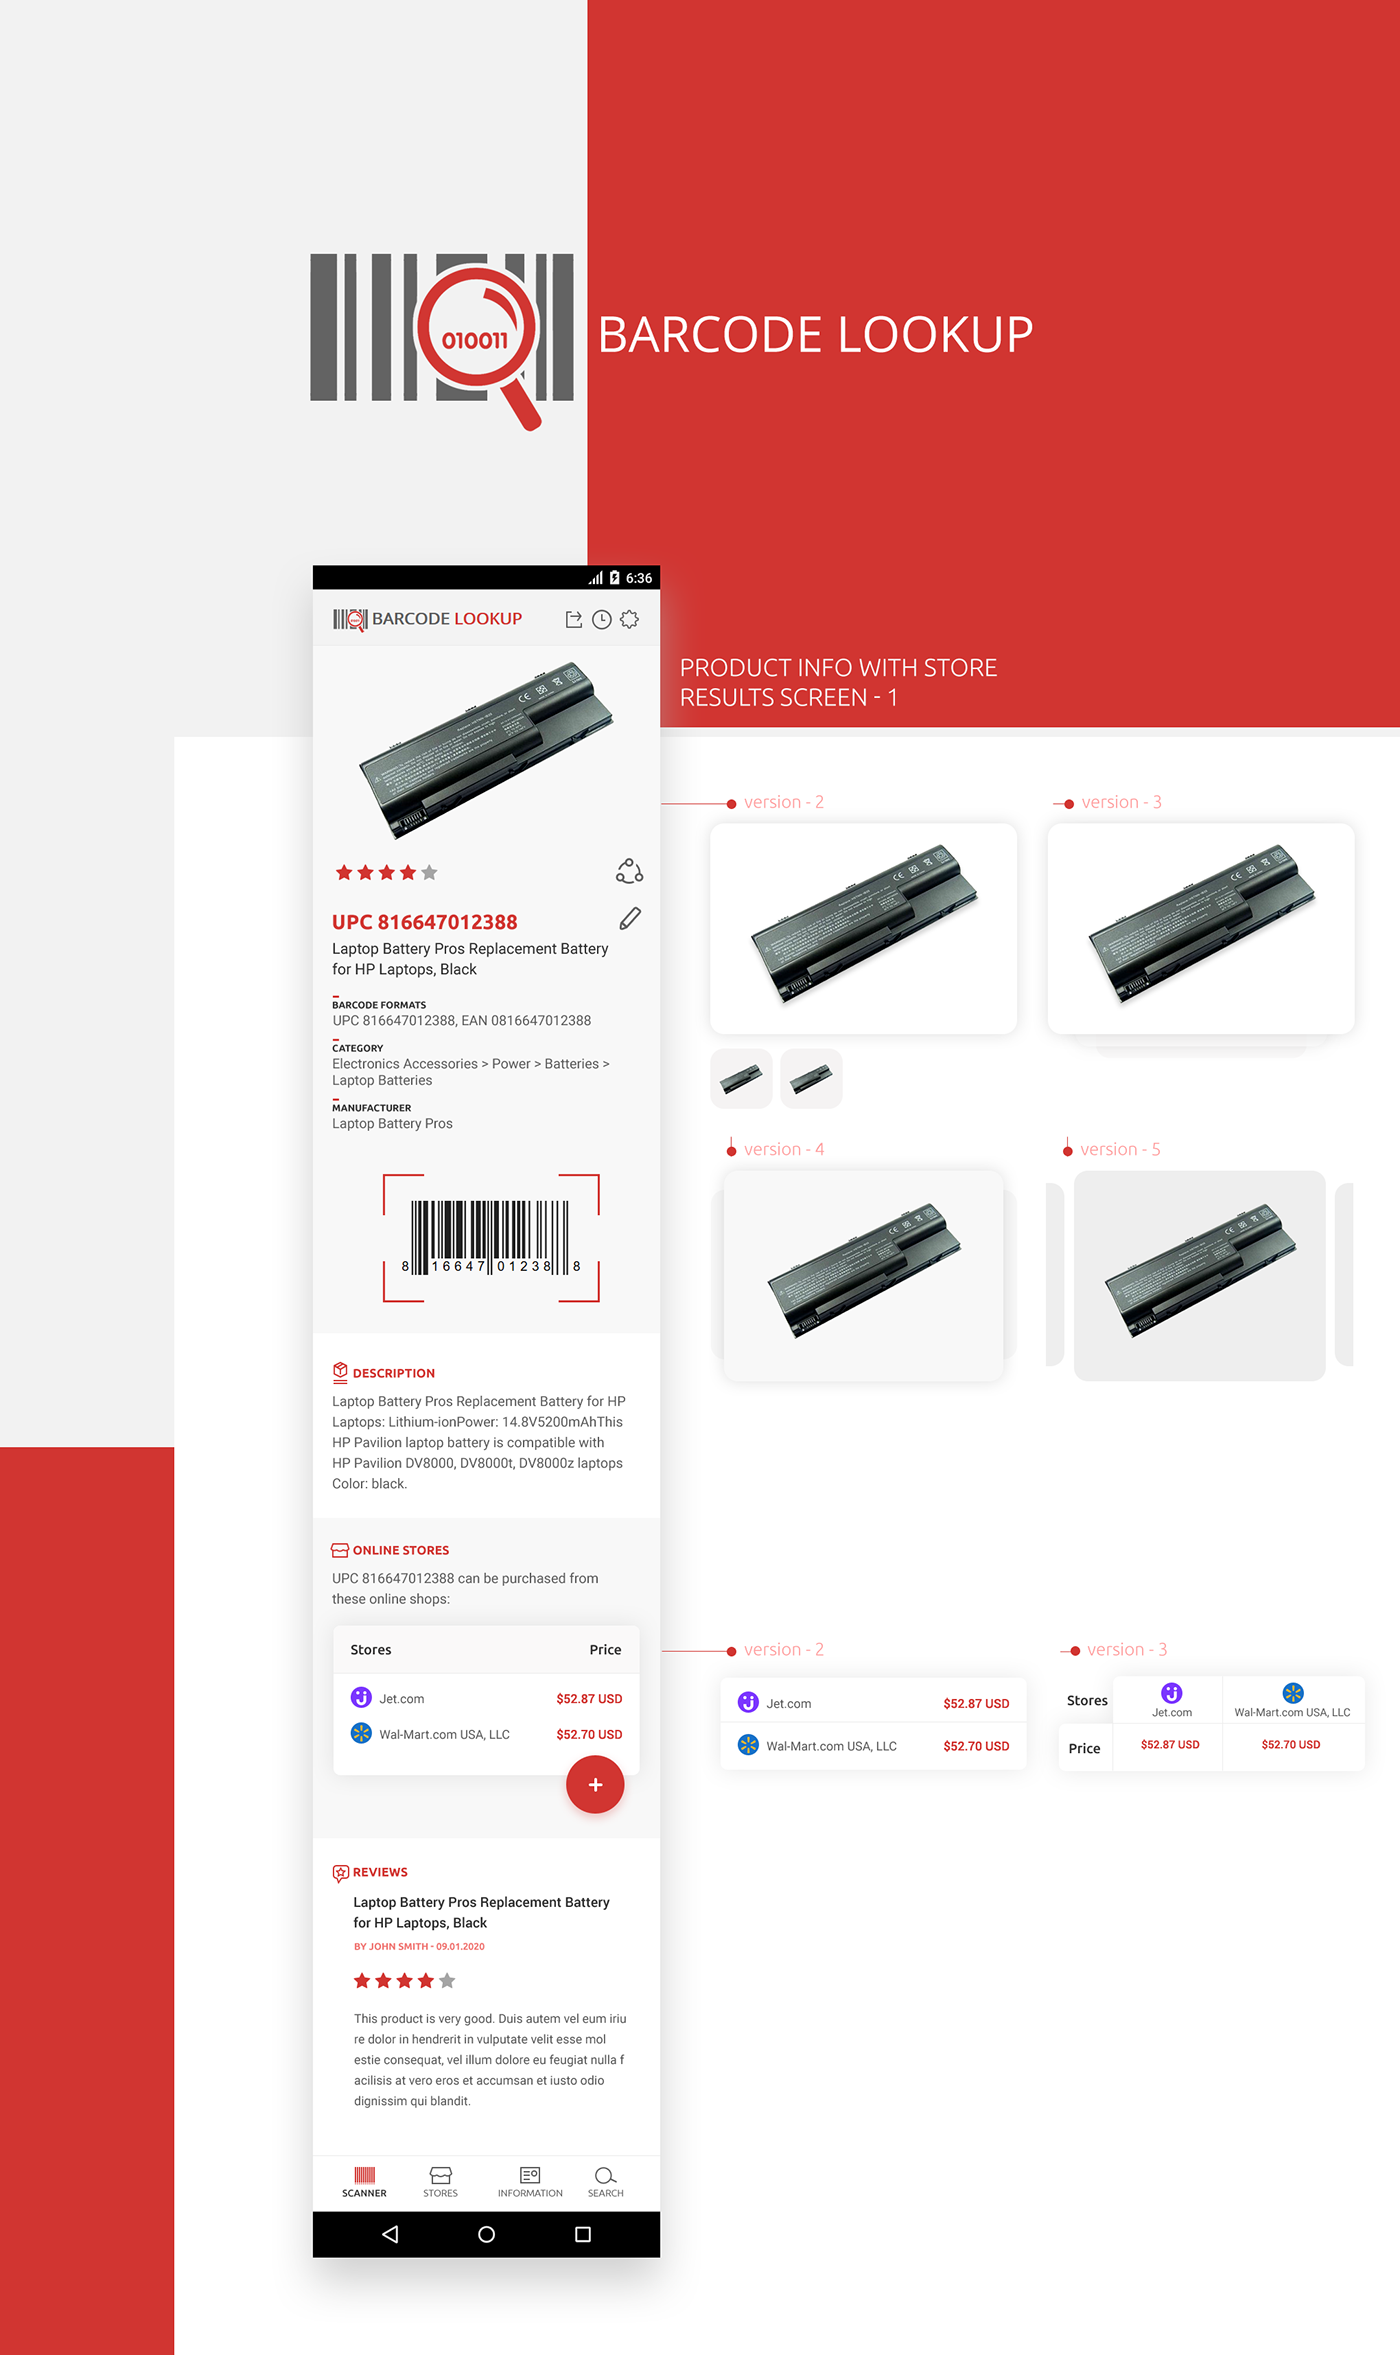 barcode scanner Barcode Number android mobile app search product Product Information online stores purchase online Ecommerce Red theme ui-ux Google Amazon Ebay